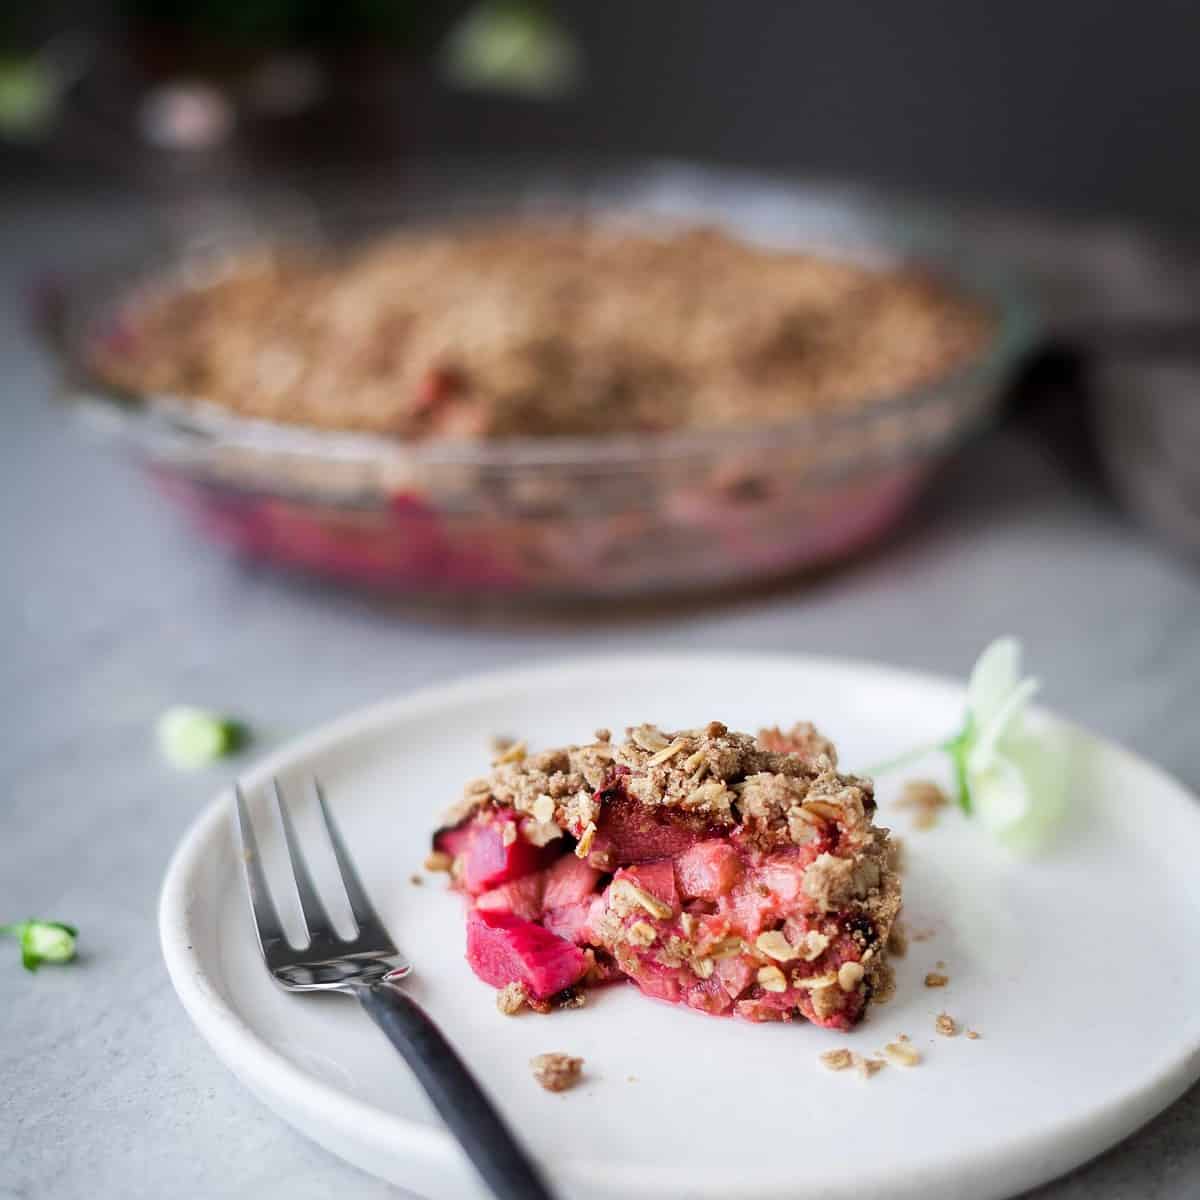  Get ready to wow your taste buds with this delicious and tangy rhubarb cobbler.